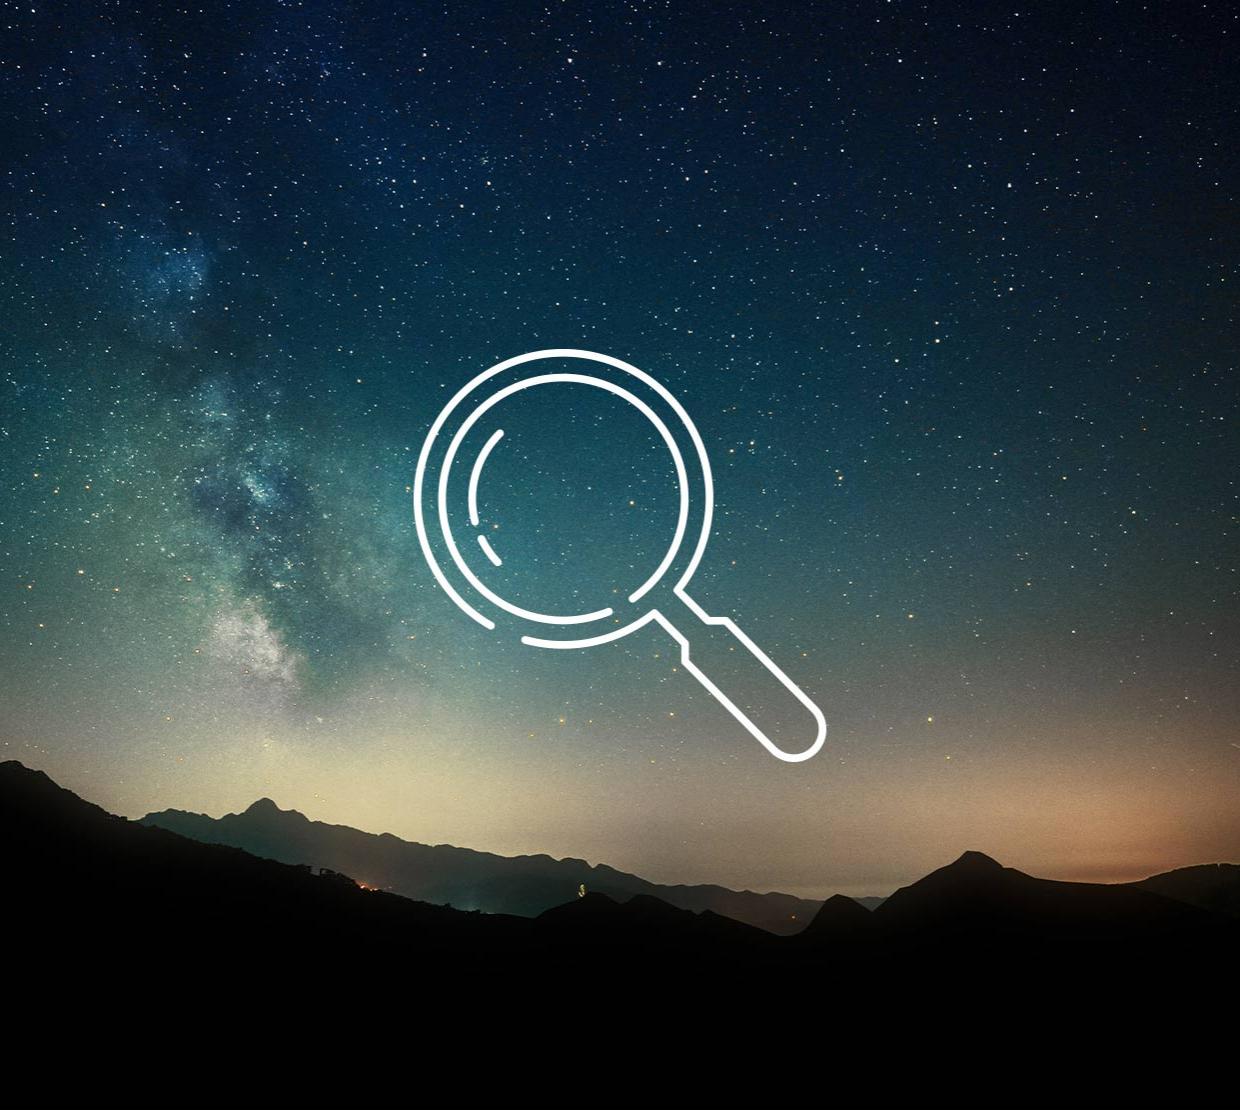 magnifying glass icon above image of mountain ridge at night